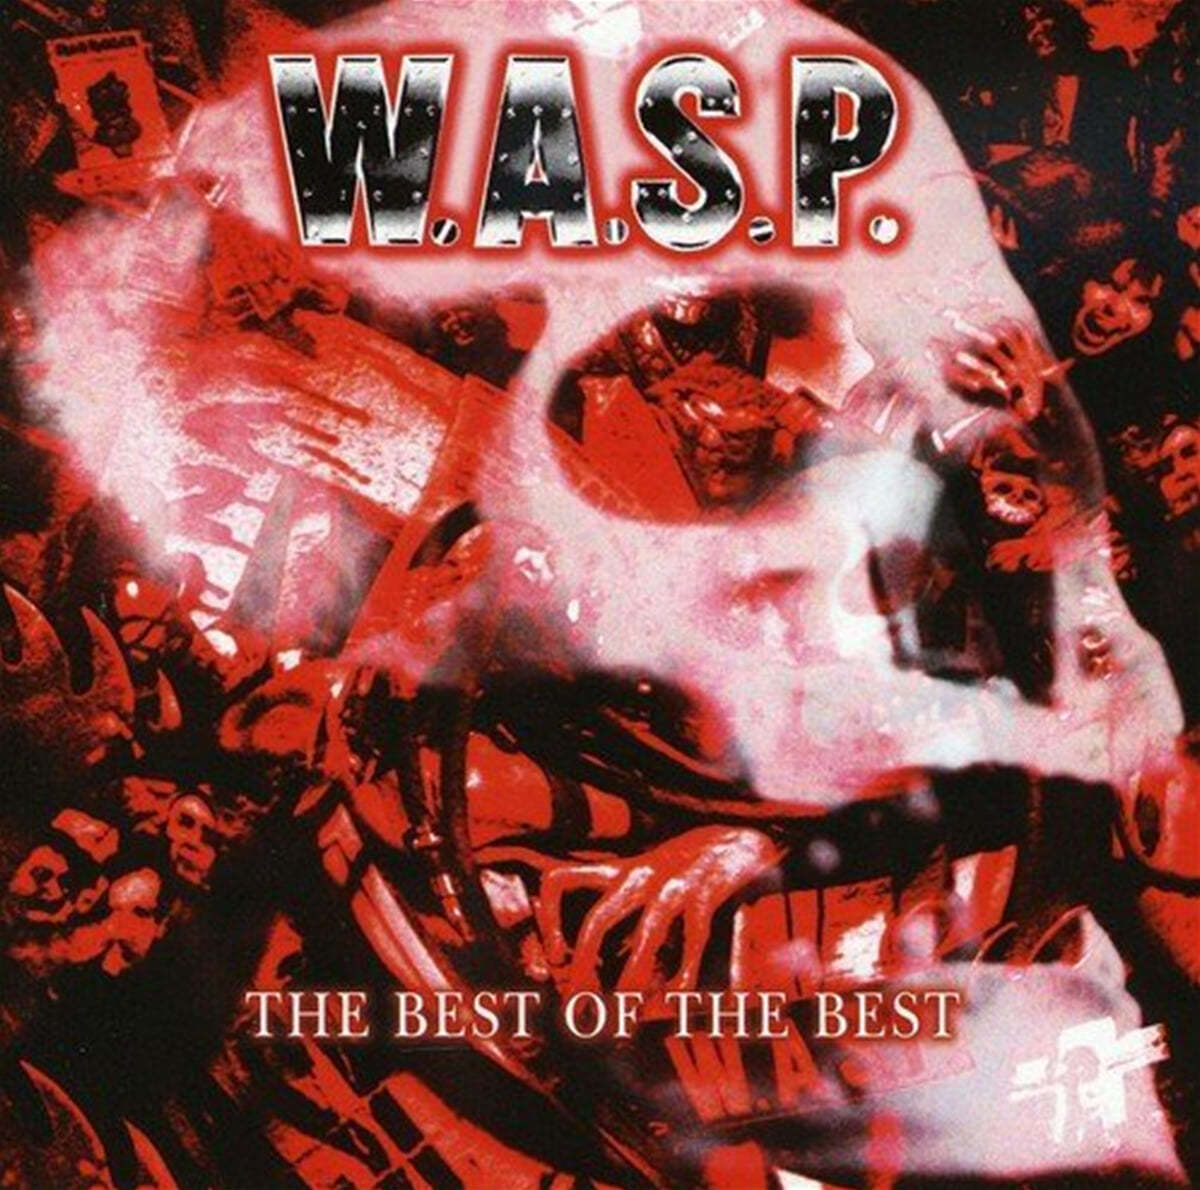 W.A.S.P. (와스프) - Best Of The Best 